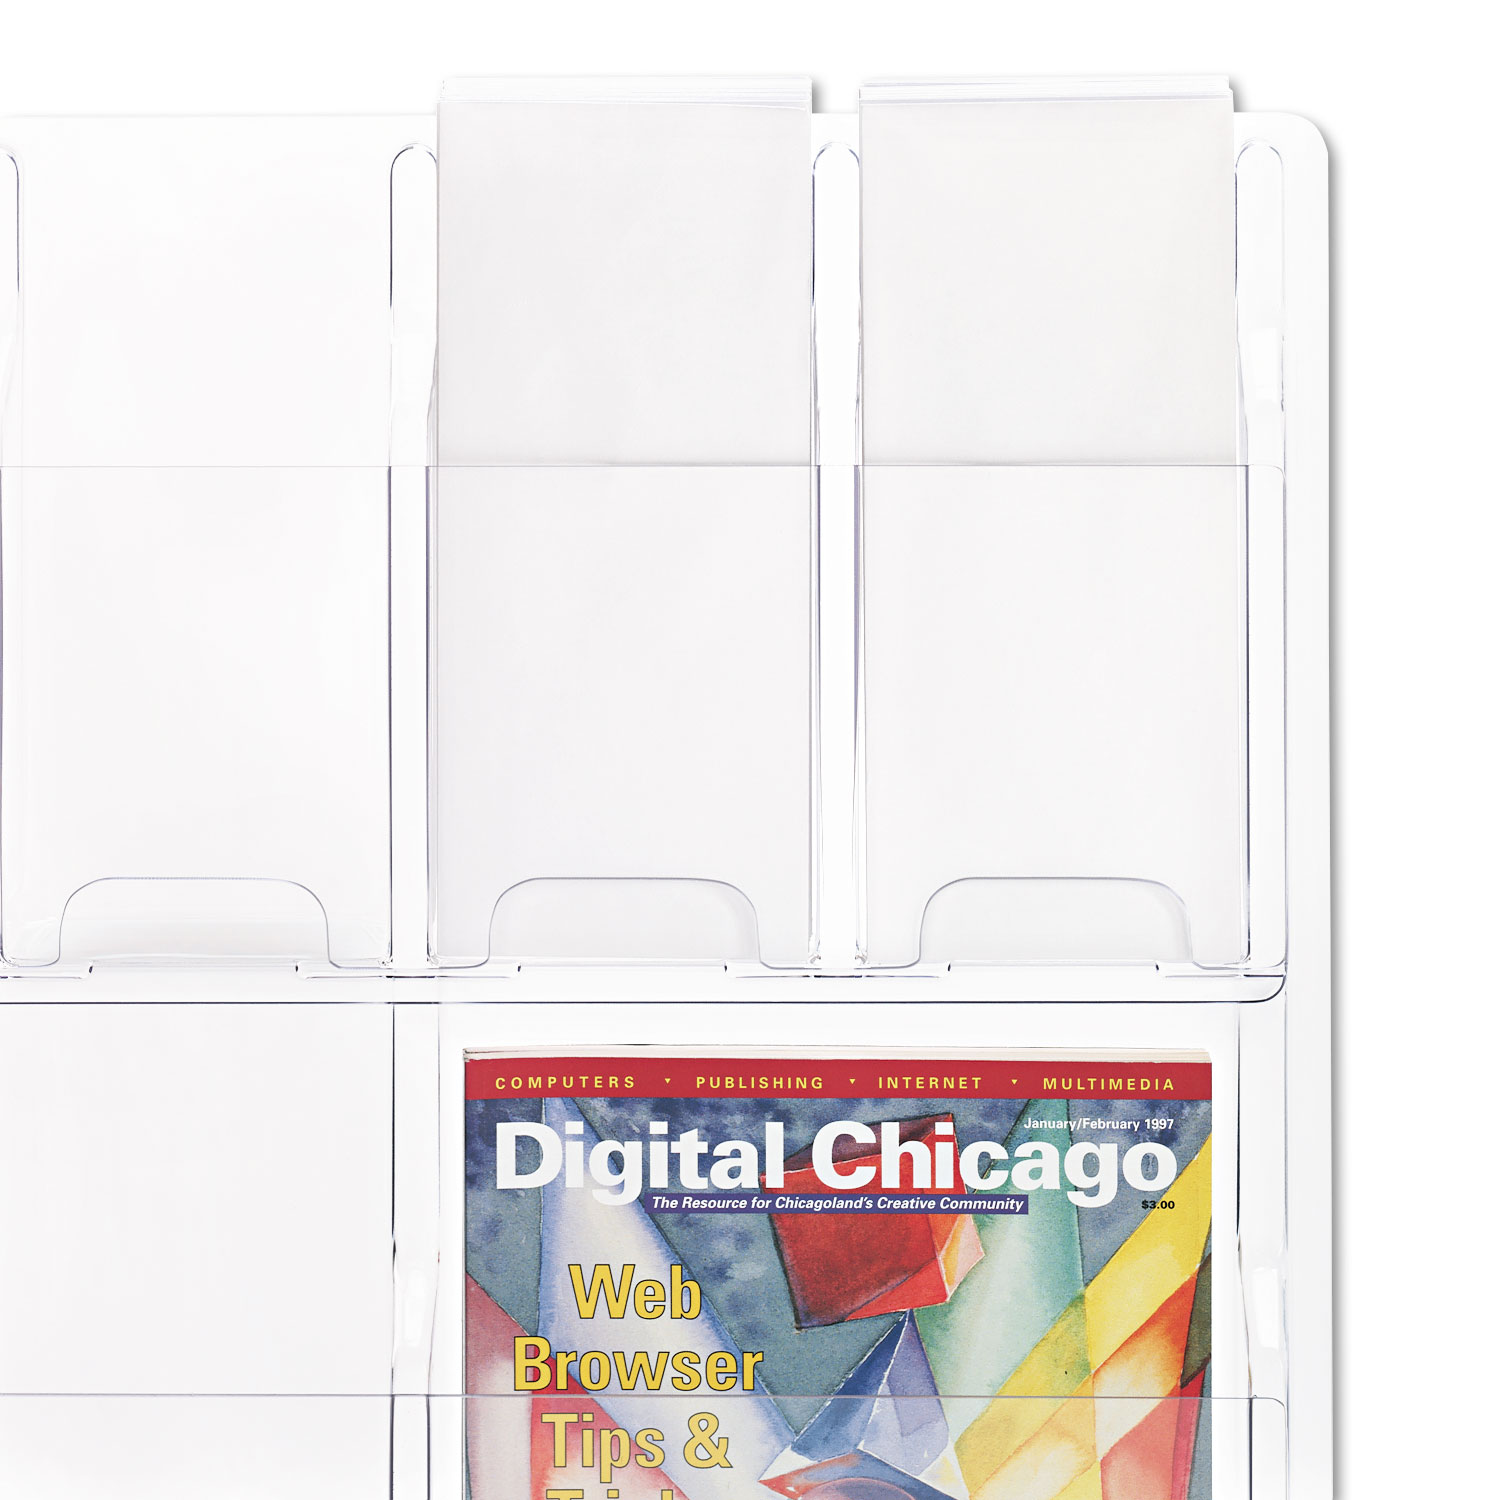 Reveal Clear Literature Displays, Nine Compartments, 30w x 2d x 22-1/2h, Clear